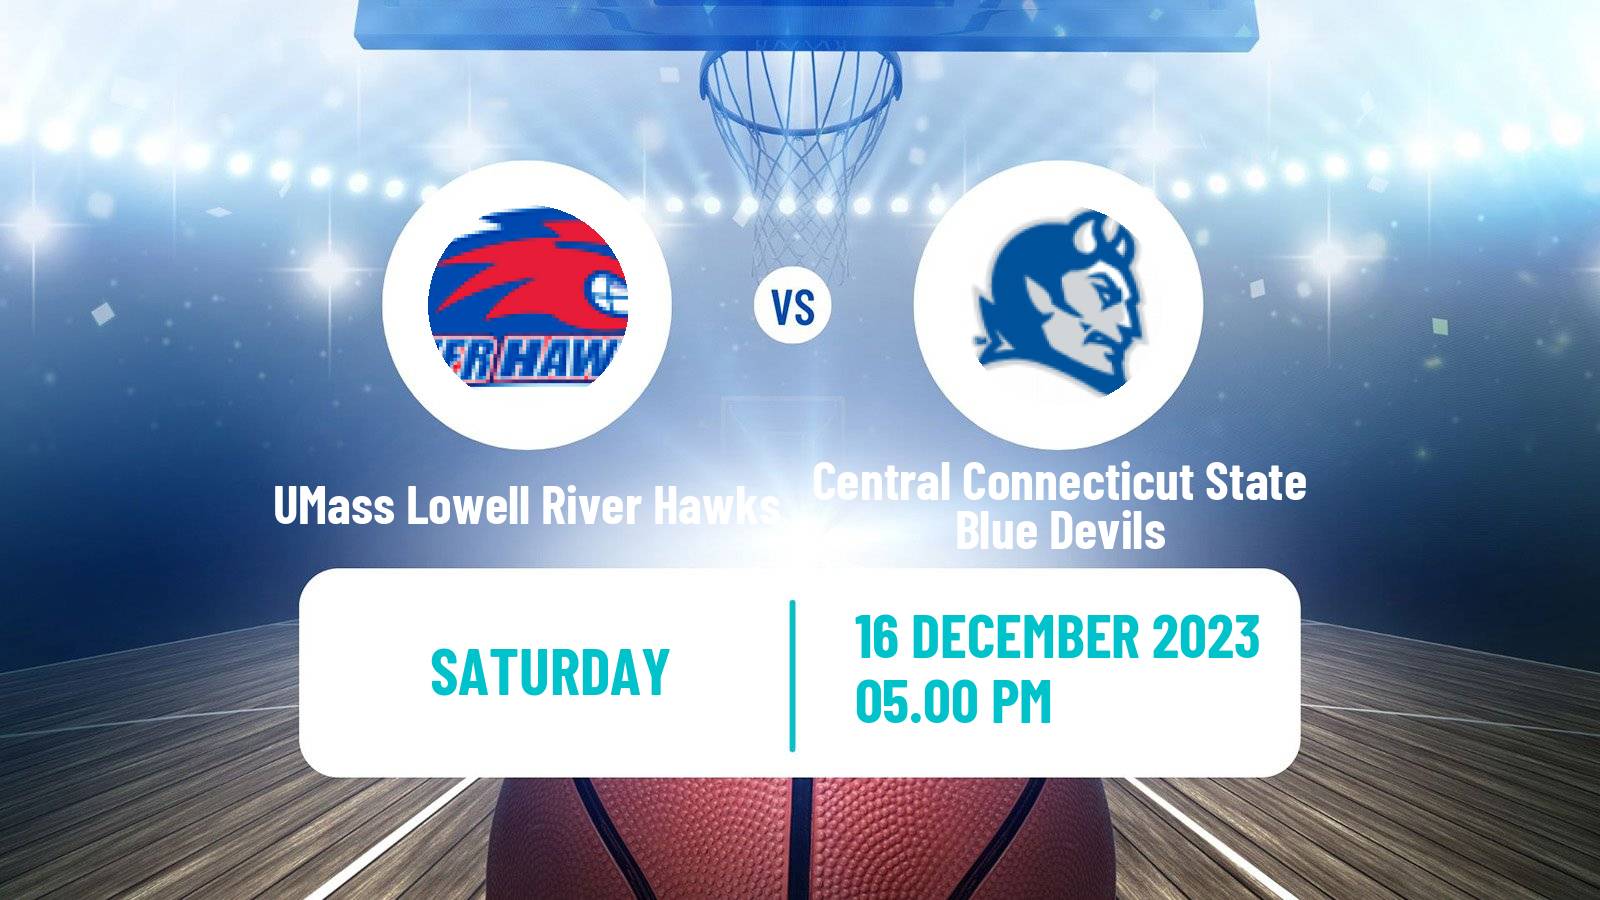 Basketball NCAA College Basketball UMass Lowell River Hawks - Central Connecticut State Blue Devils